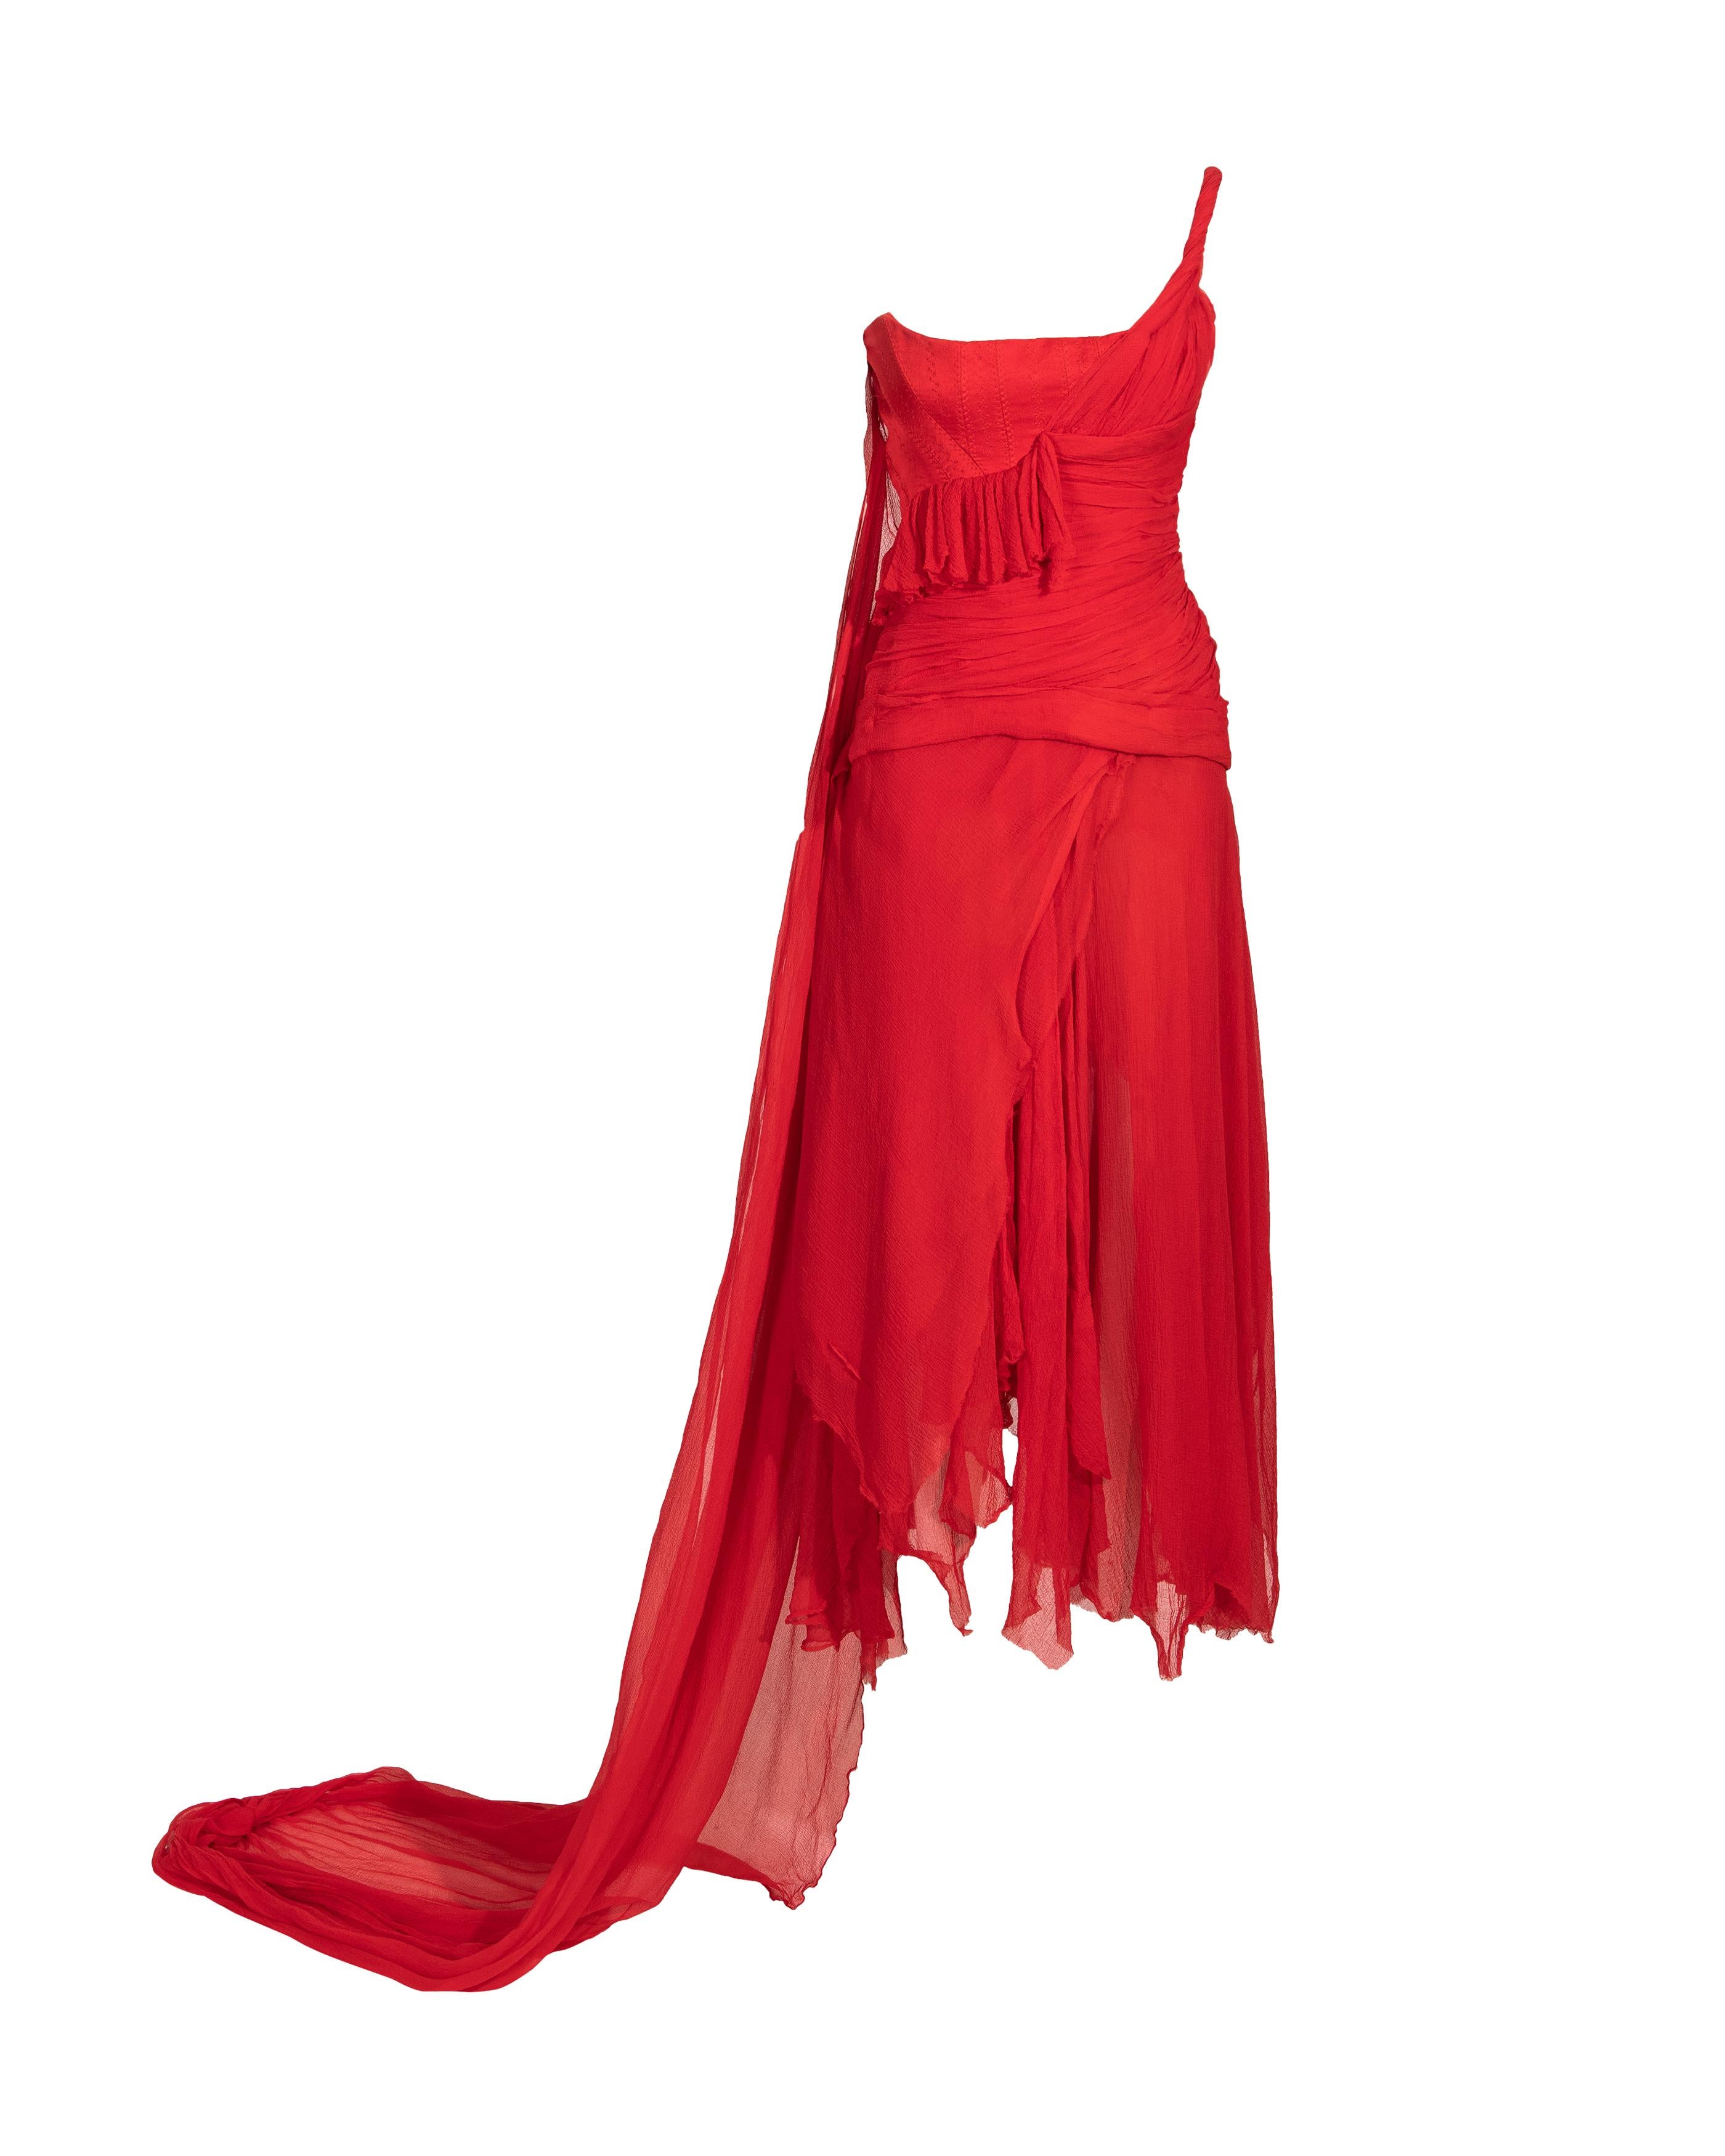 S/S 2003 Alexander McQueen  'Irere' Collection Red Silk Chiffon Gown with Sash For Sale 5